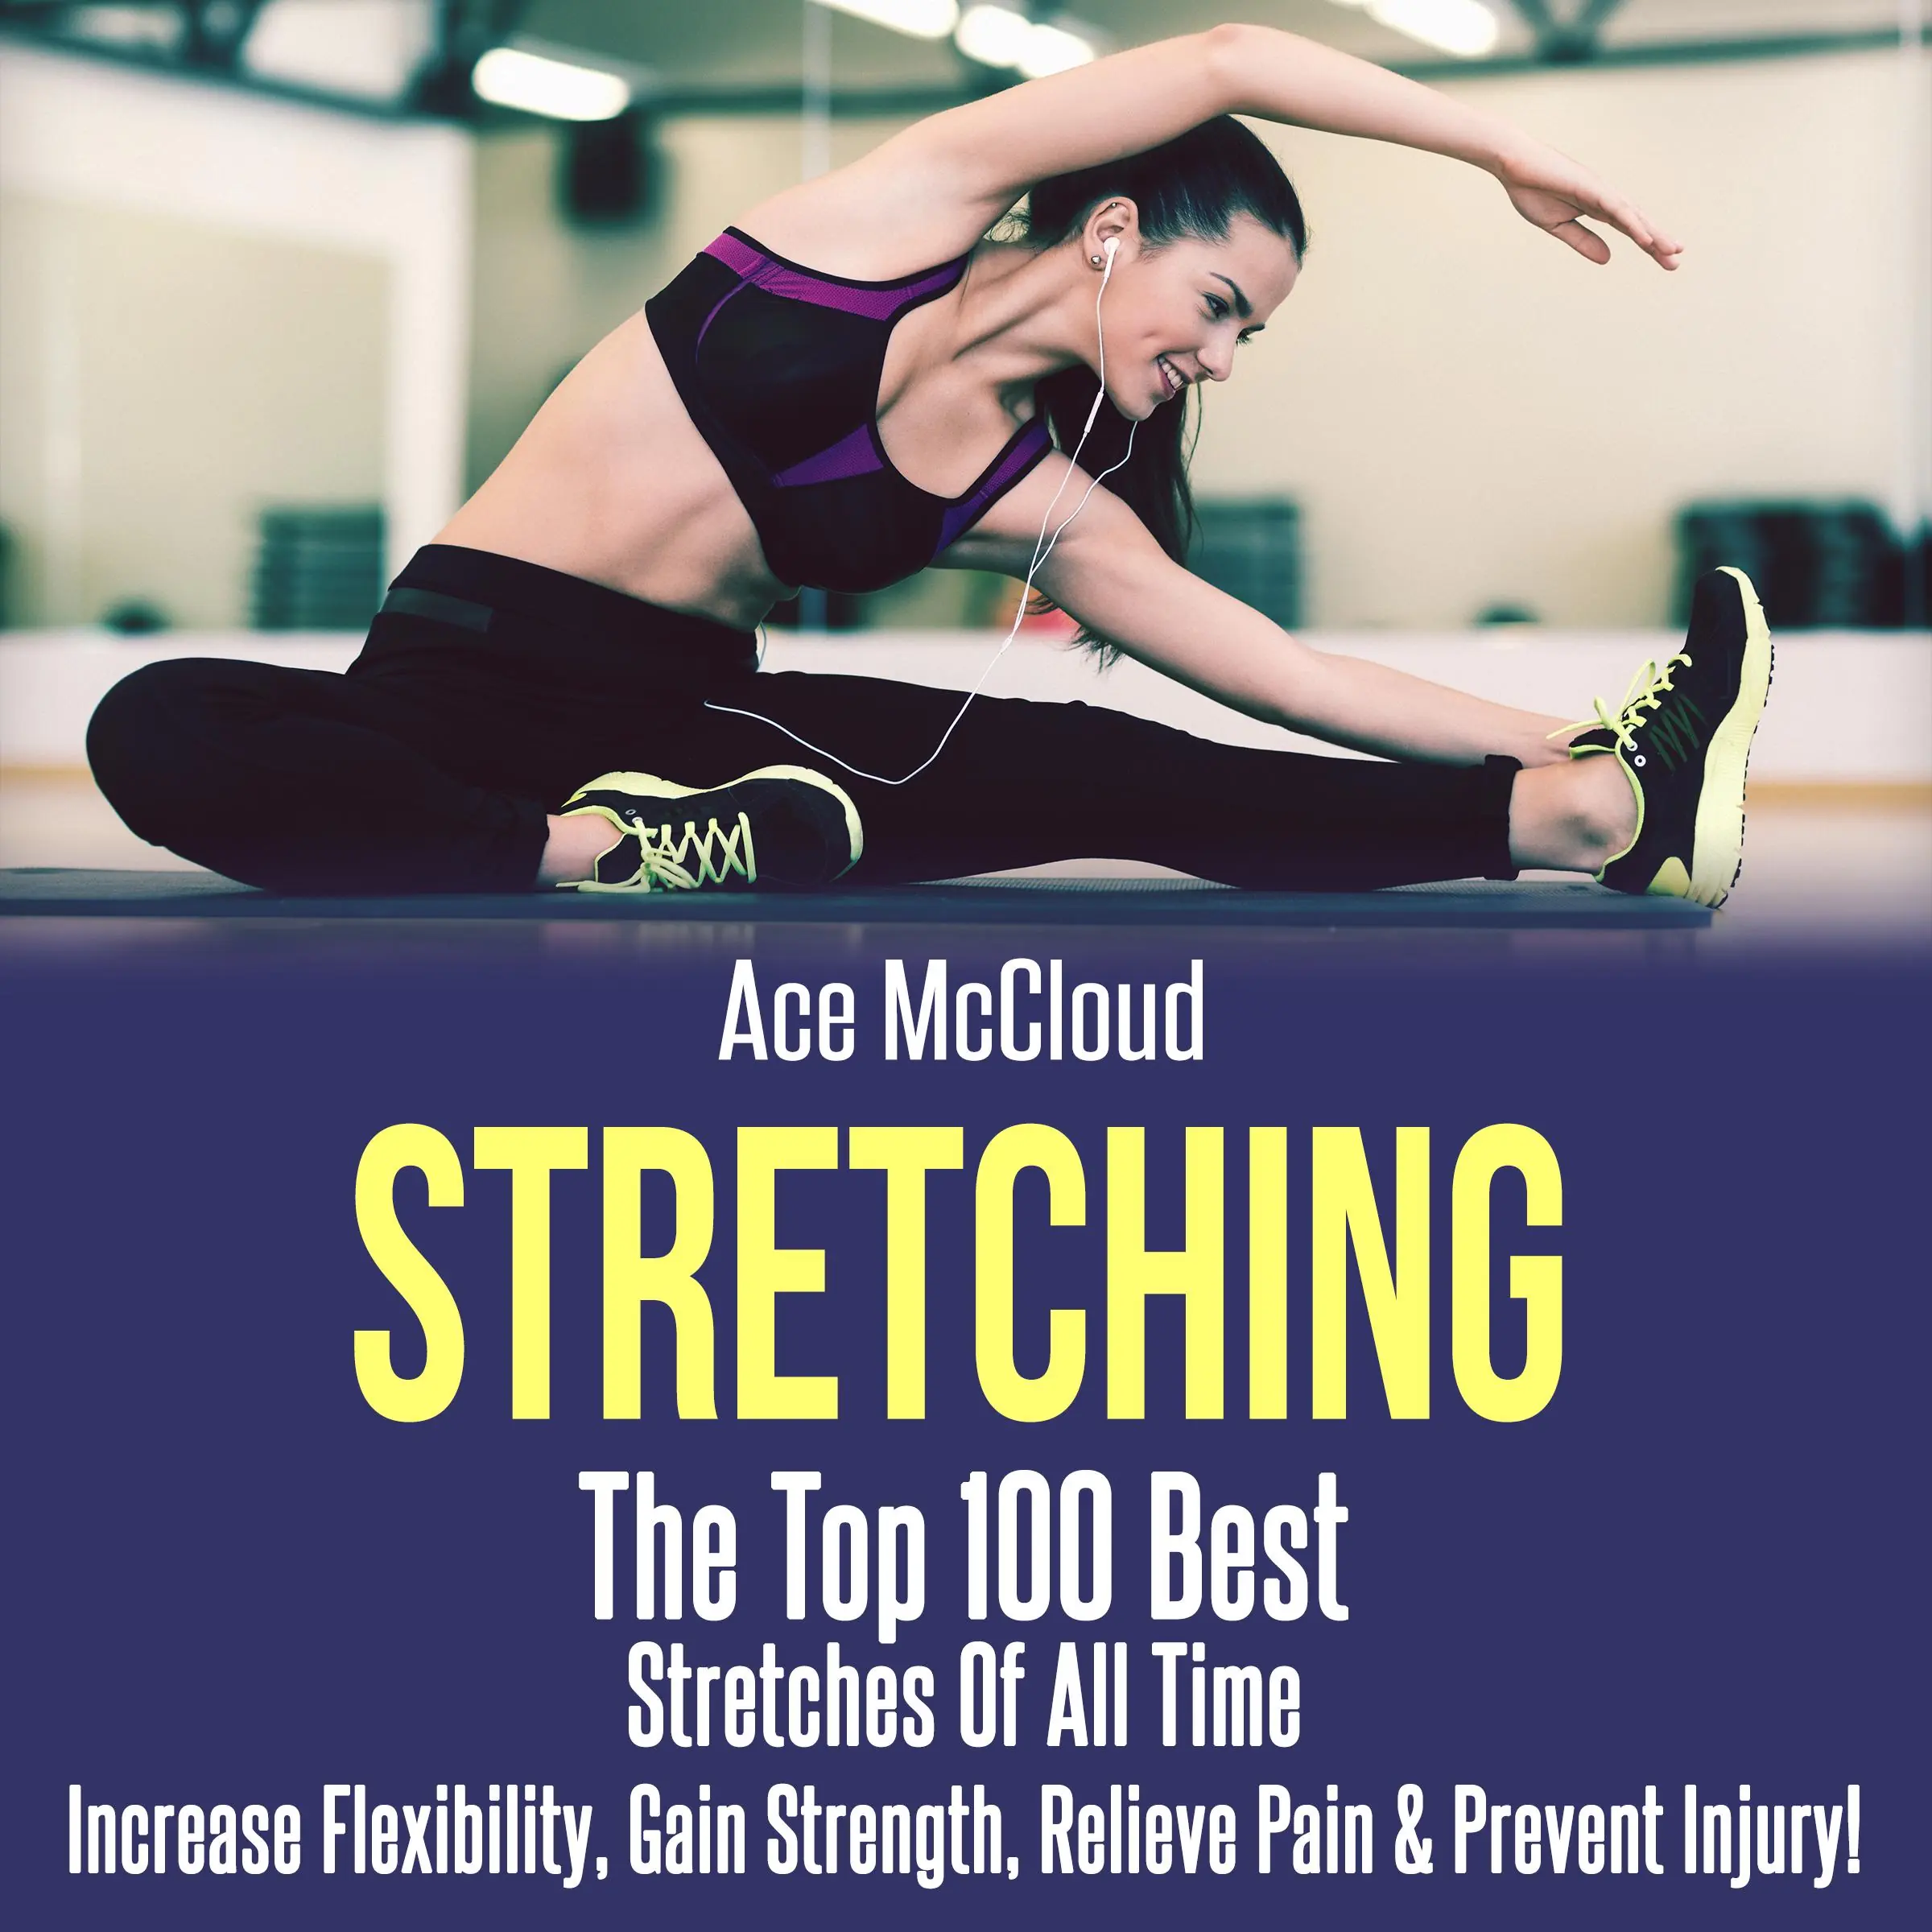 Stretching: The Top 100 Best Stretches Of All Time: Increase Flexibility, Gain Strength, Relieve Pain & Prevent Injury by Ace McCloud Audiobook